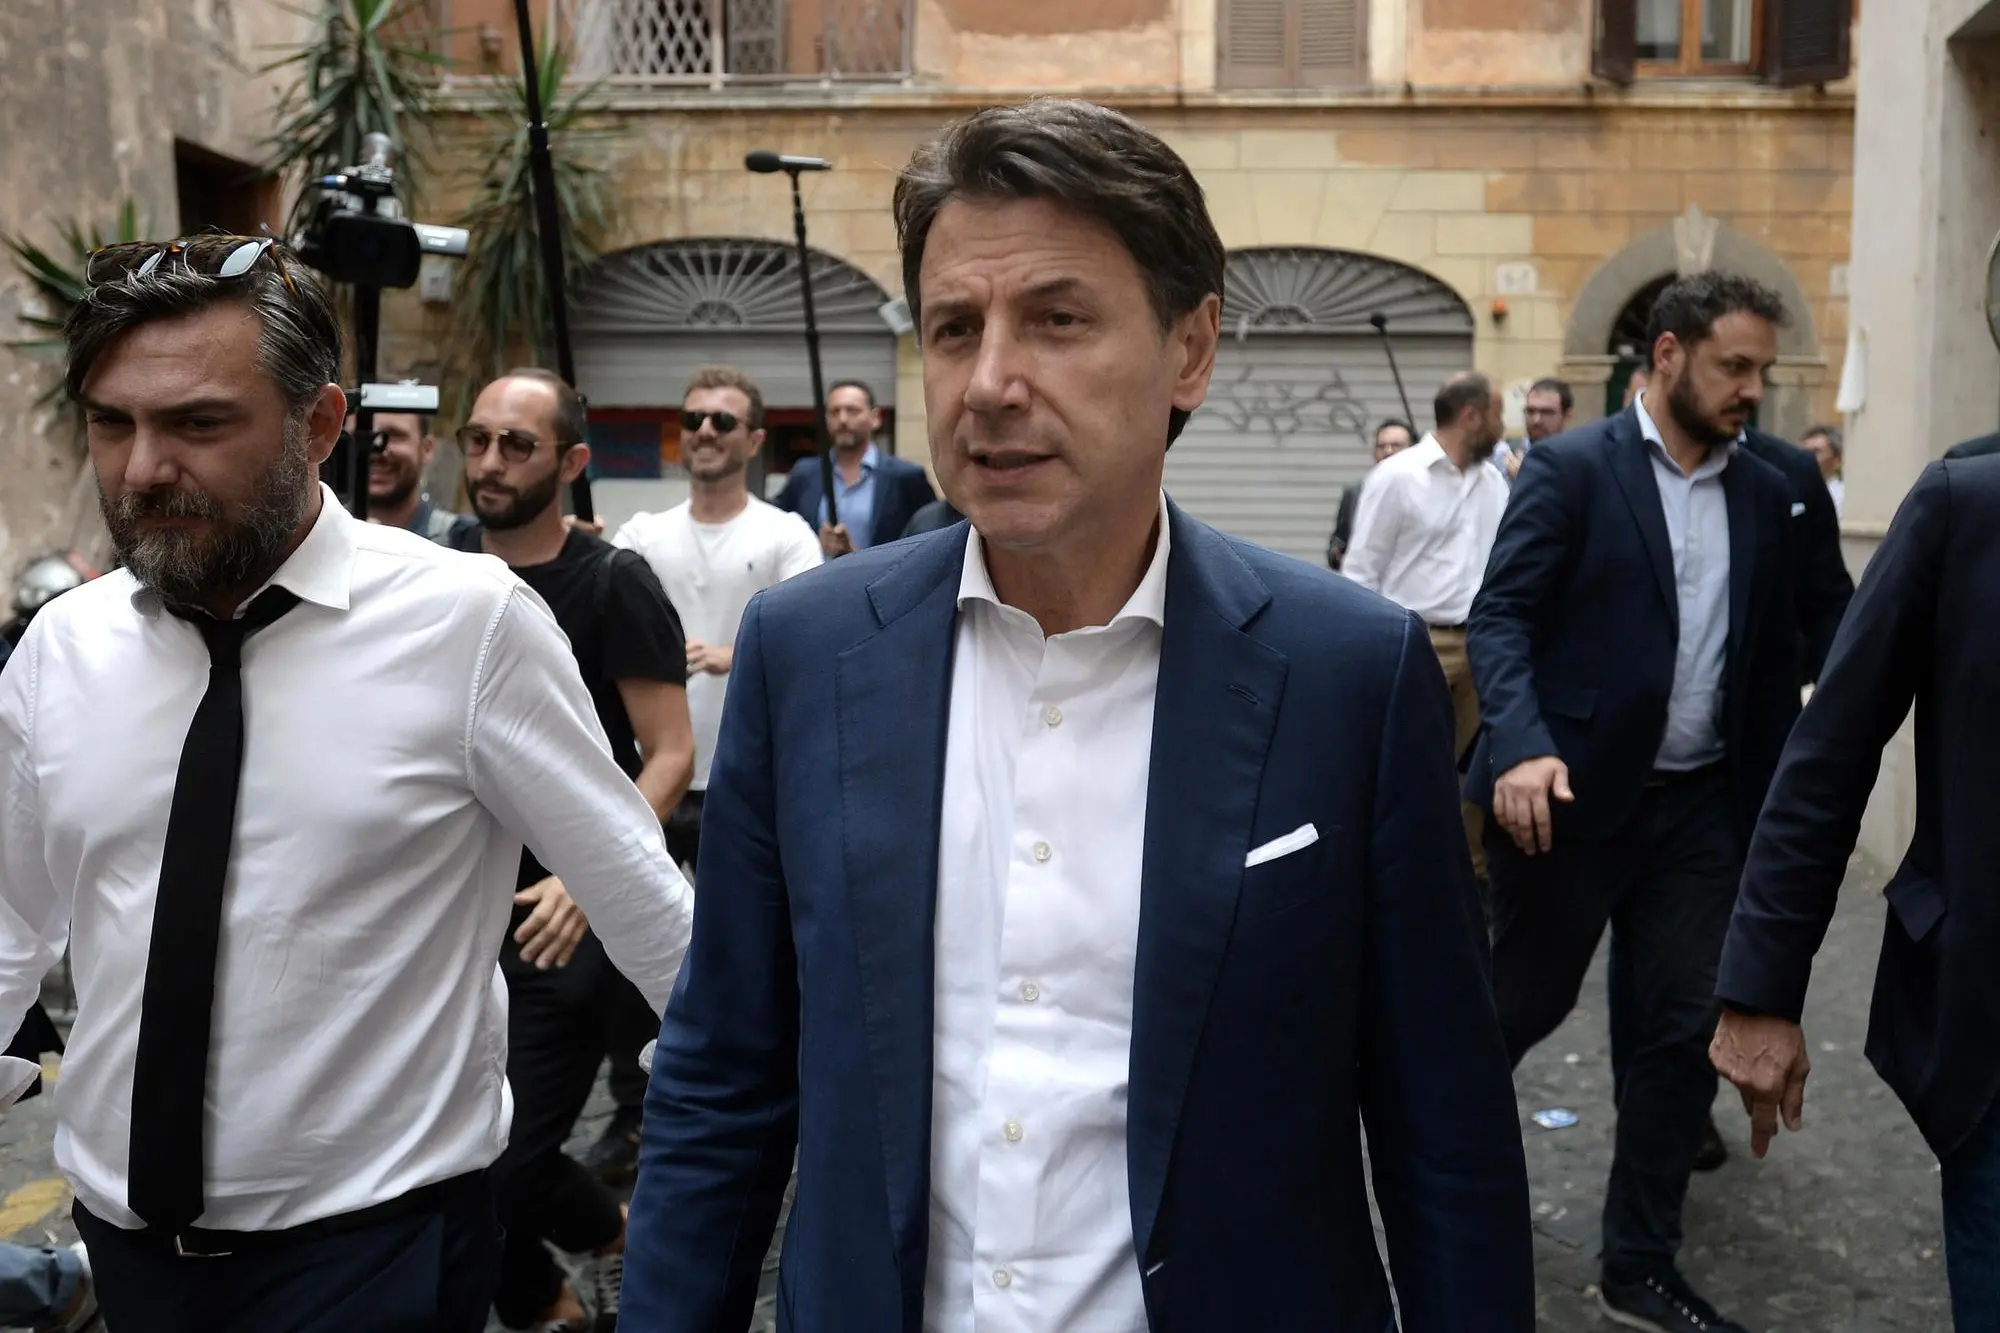 President of M5S (Five Star Movement), Giuseppe Conte, after having lunch with some members of the Movement in a restaurant in the historic center of Rome, Italy, 22 June 2022. ANSA/FABIO CIMAGLIA